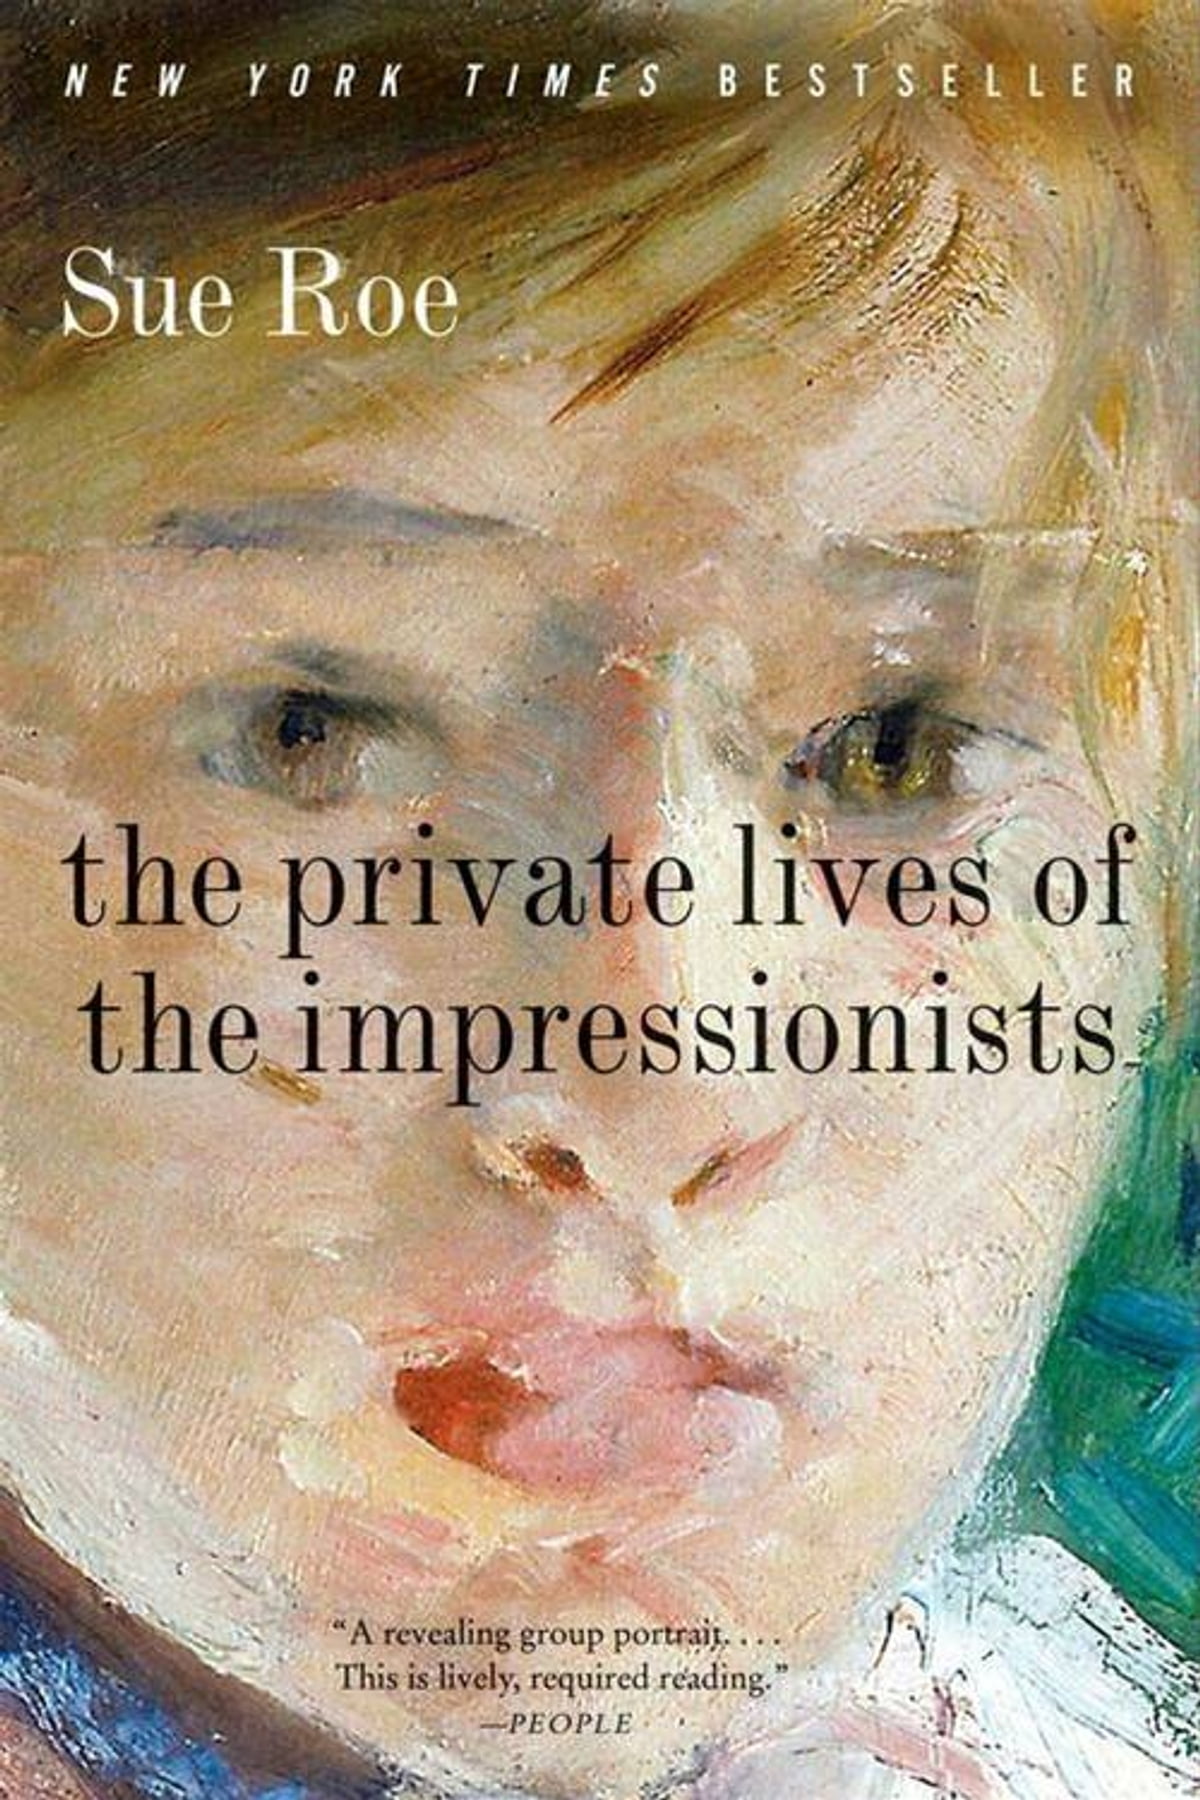 Image for "The Private Lives of the Impressionists"